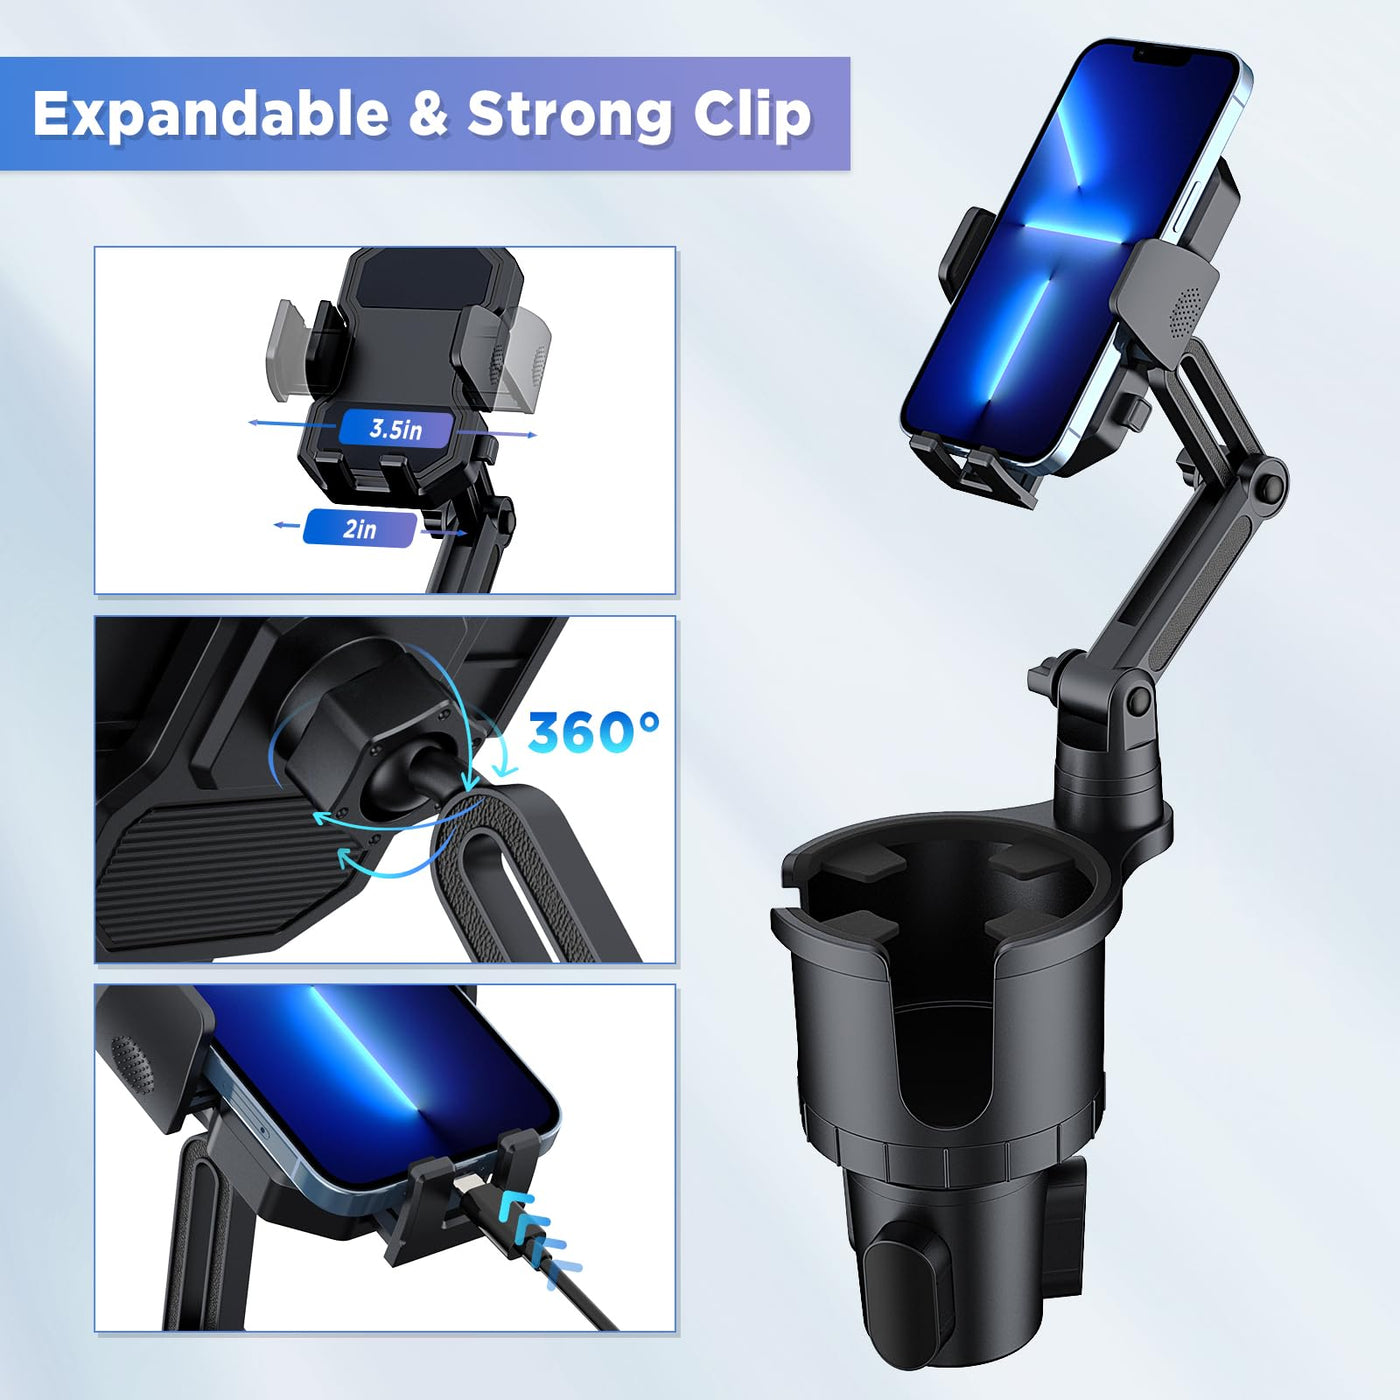 OUTXE Car Cup Holder Expander+Phone Mount, Adjustable Large Cupholder Extender Extra Expandable Drink Adapter Universal for Auto Automotive Truck RV Driver Road Trip